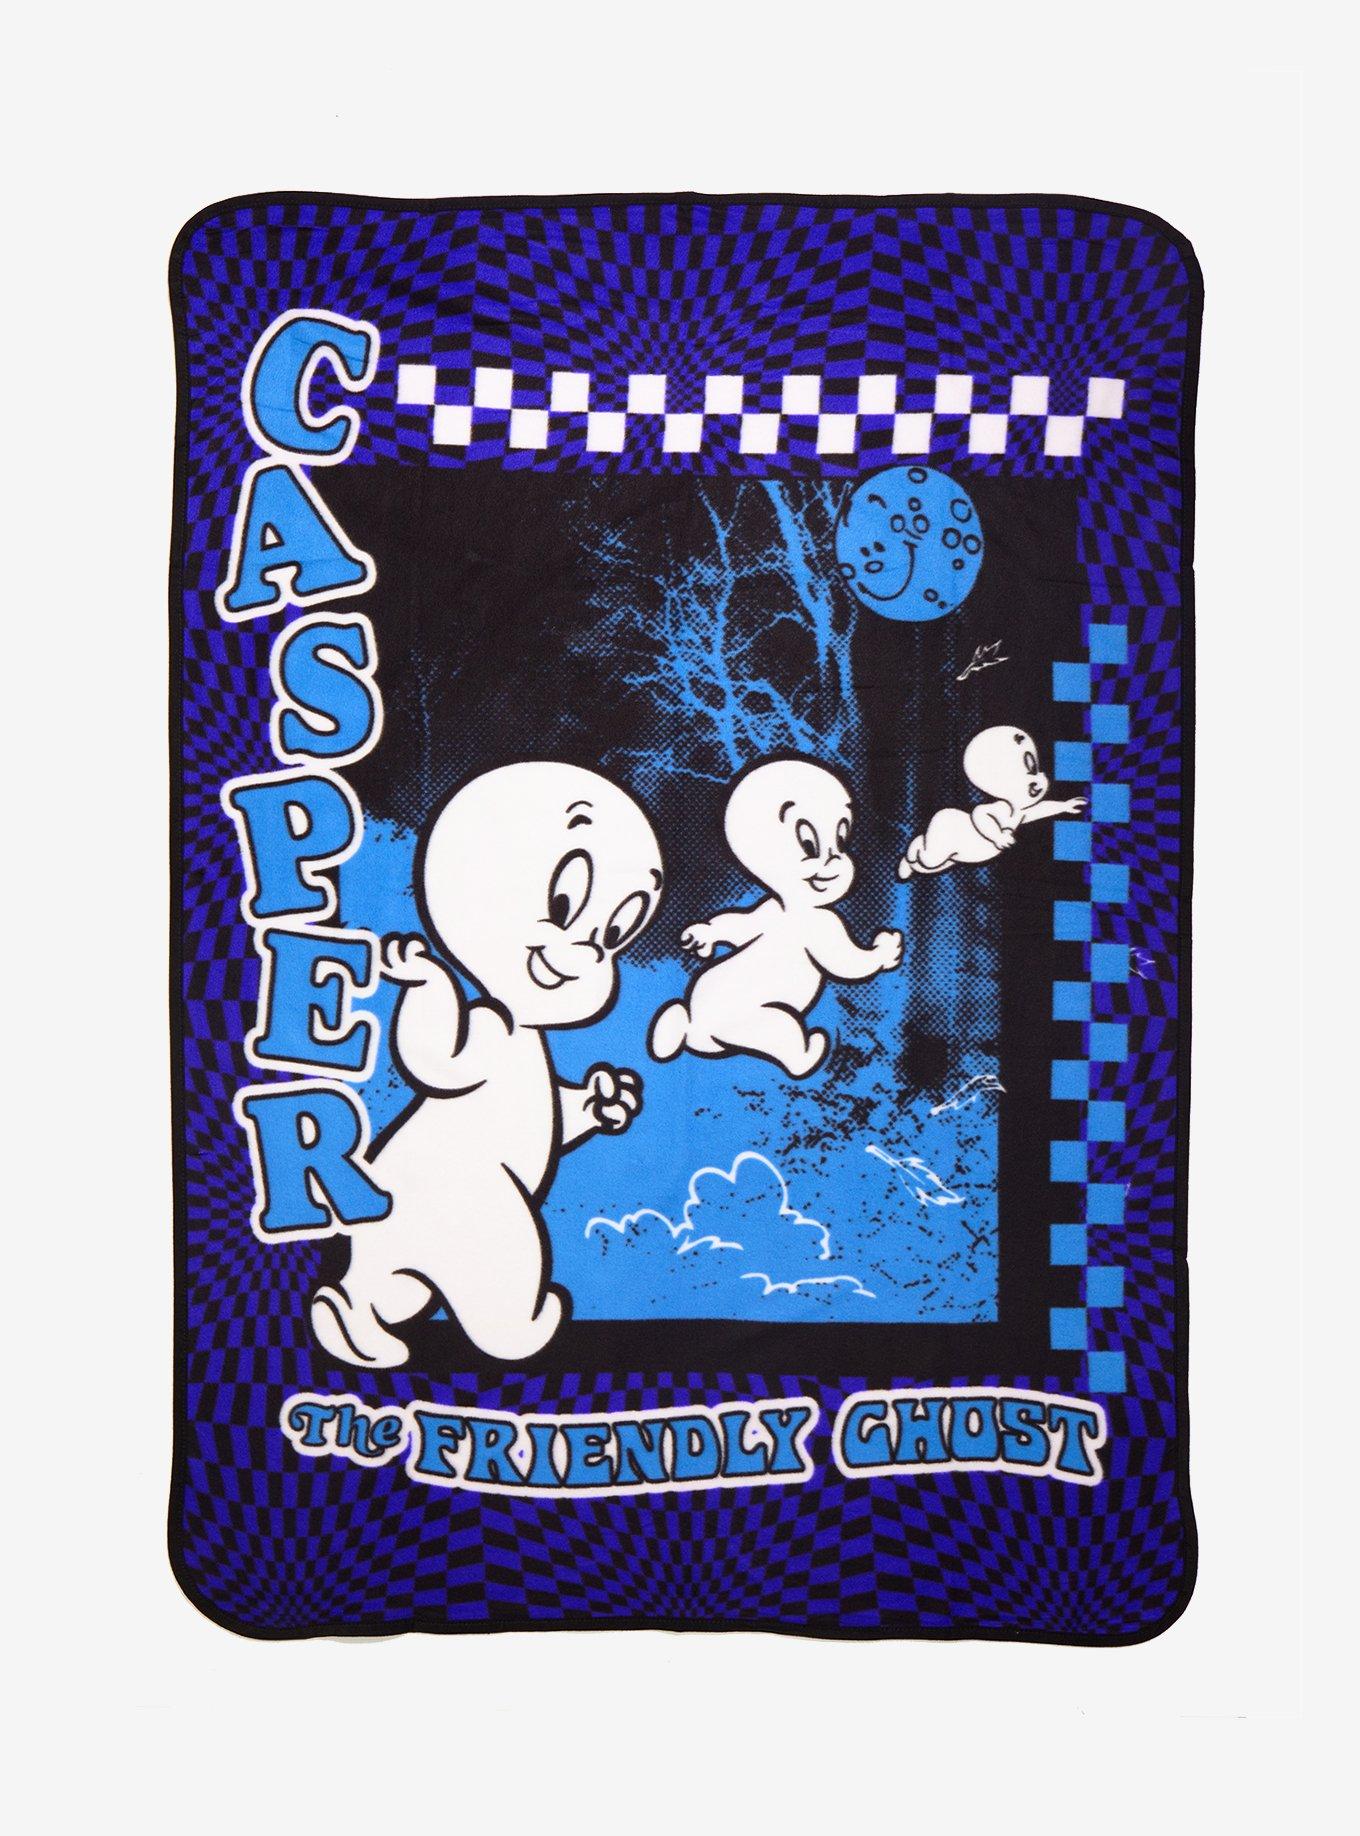 Vintage Casper The Friendly Ghost Get Spooked This Halloween T -Shirt 90s  Mens L